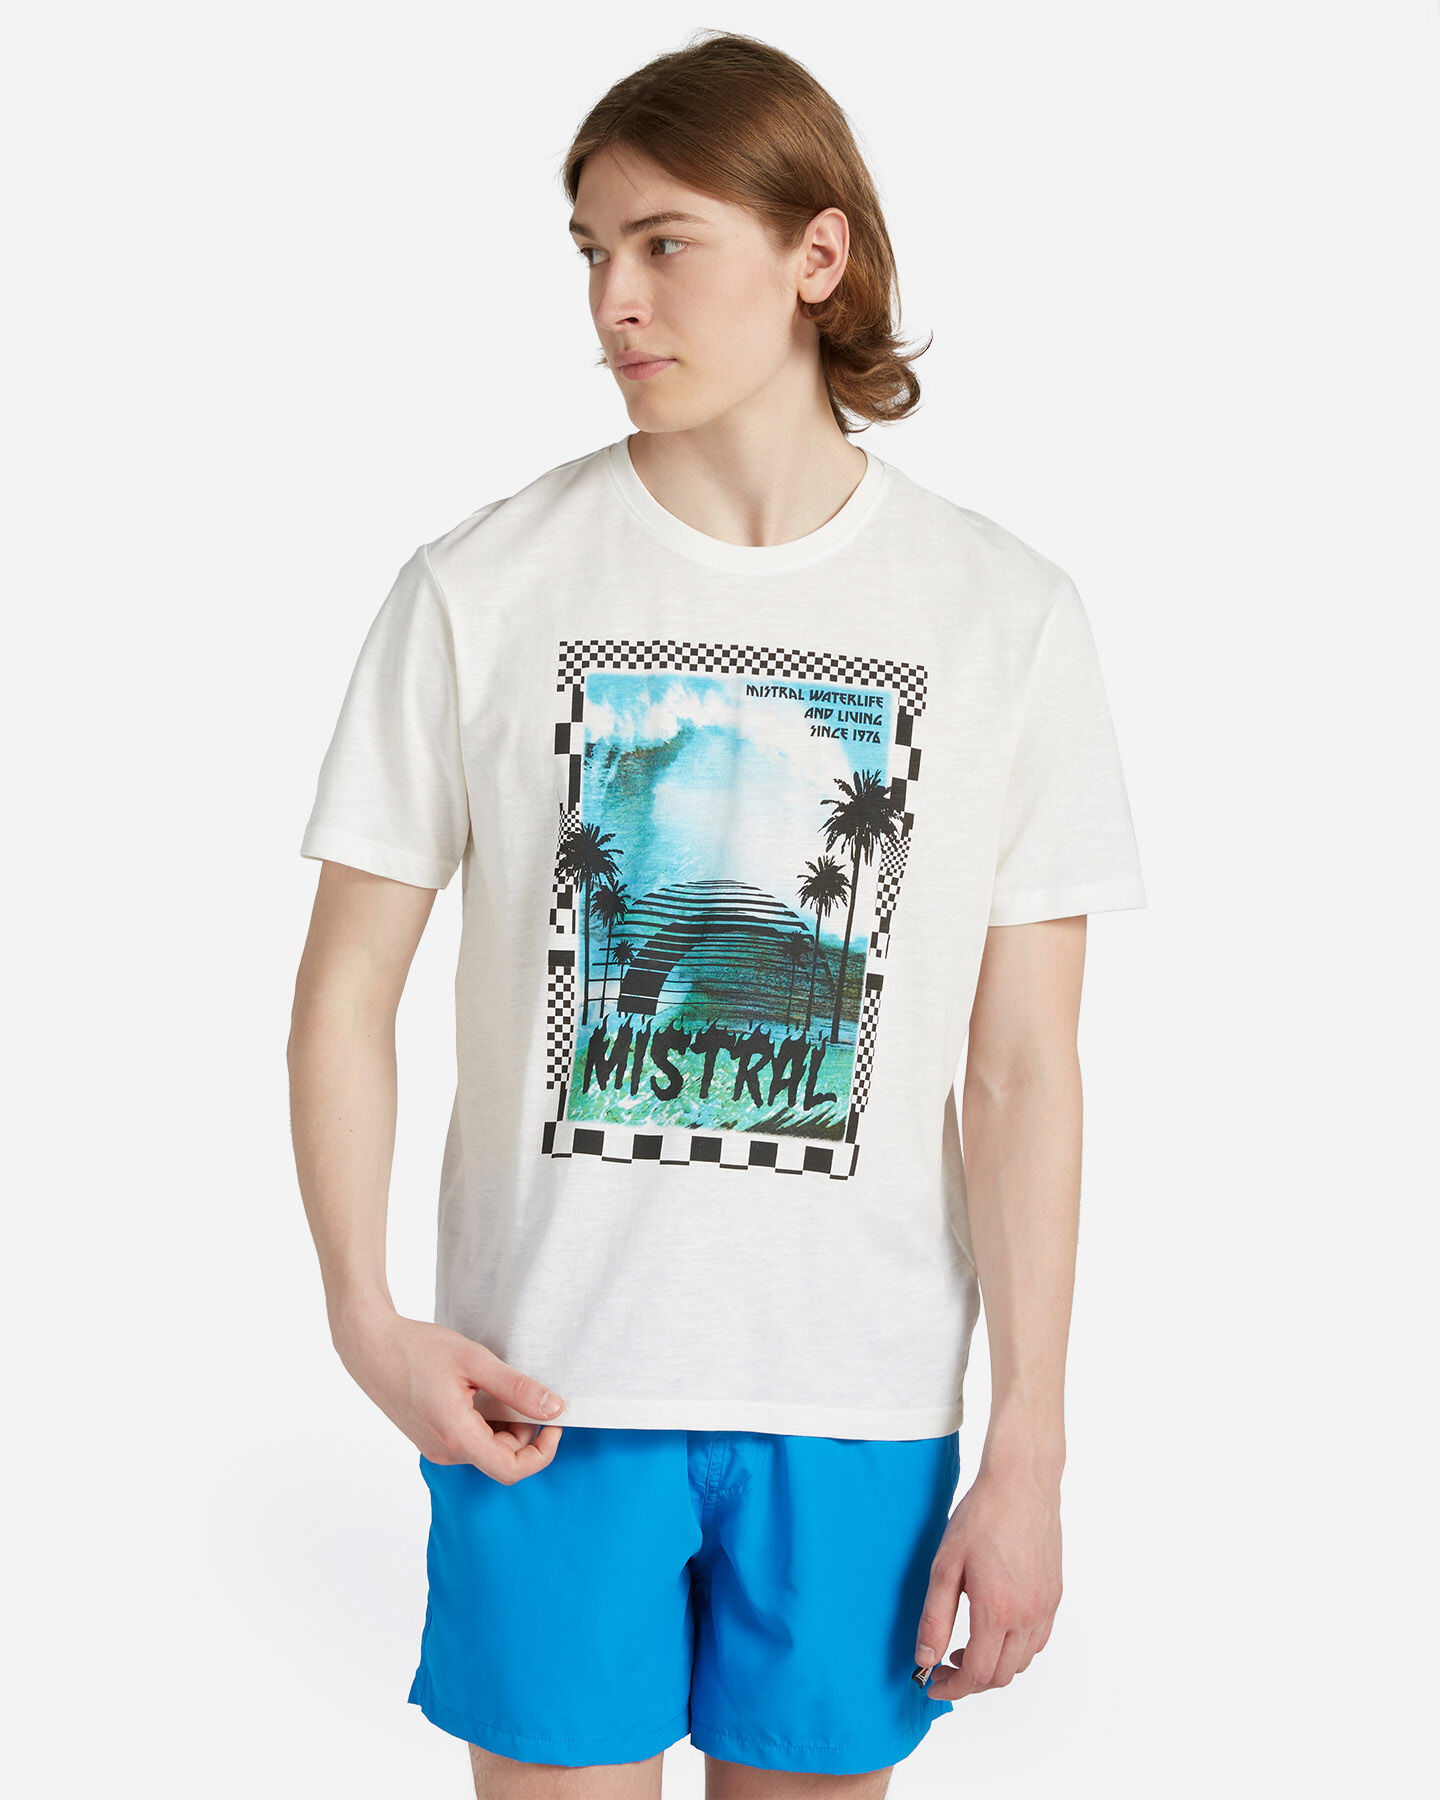  T-Shirt MISTRAL PHOTO M S4102911|001|M scatto 0